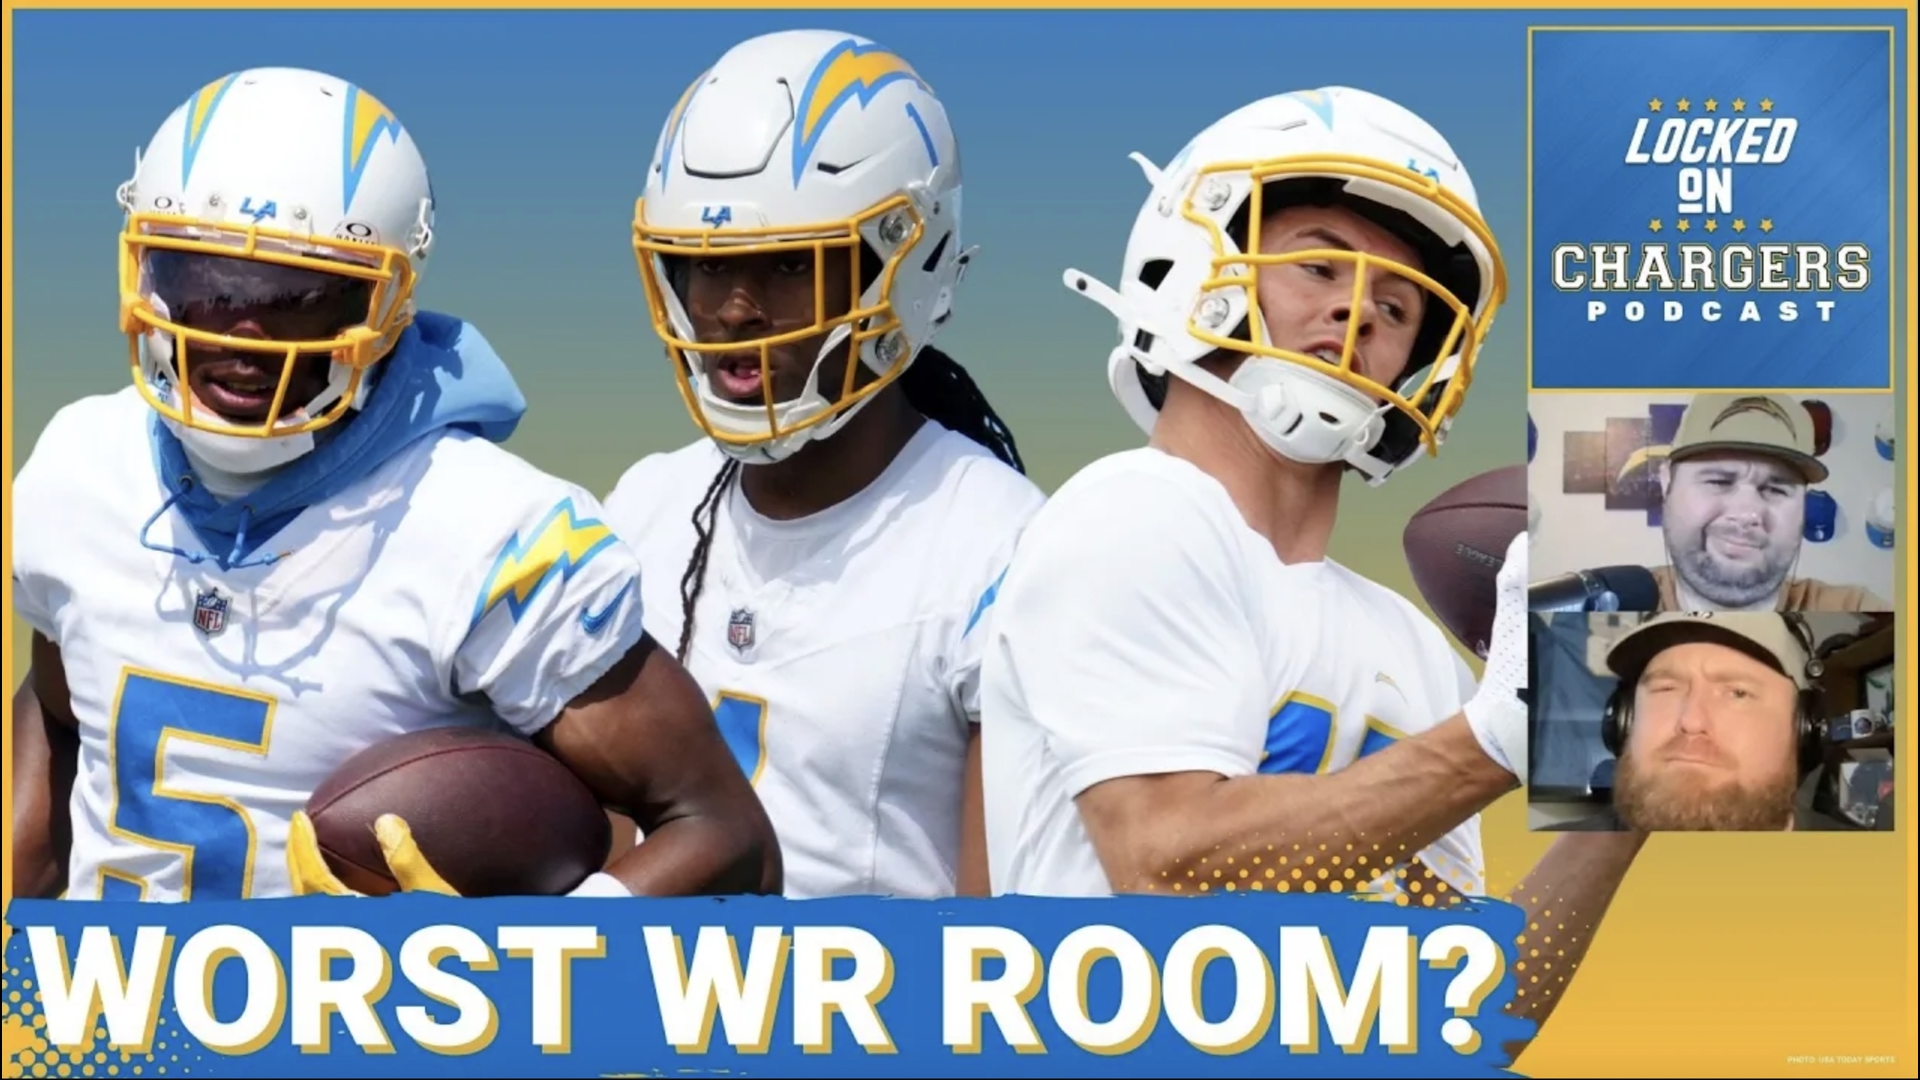 The Chargers have rebuilt their entire WR room after the departures of Keenan Allen and Mike Williams, but it could be worse than LA's young, inexperienced corps.